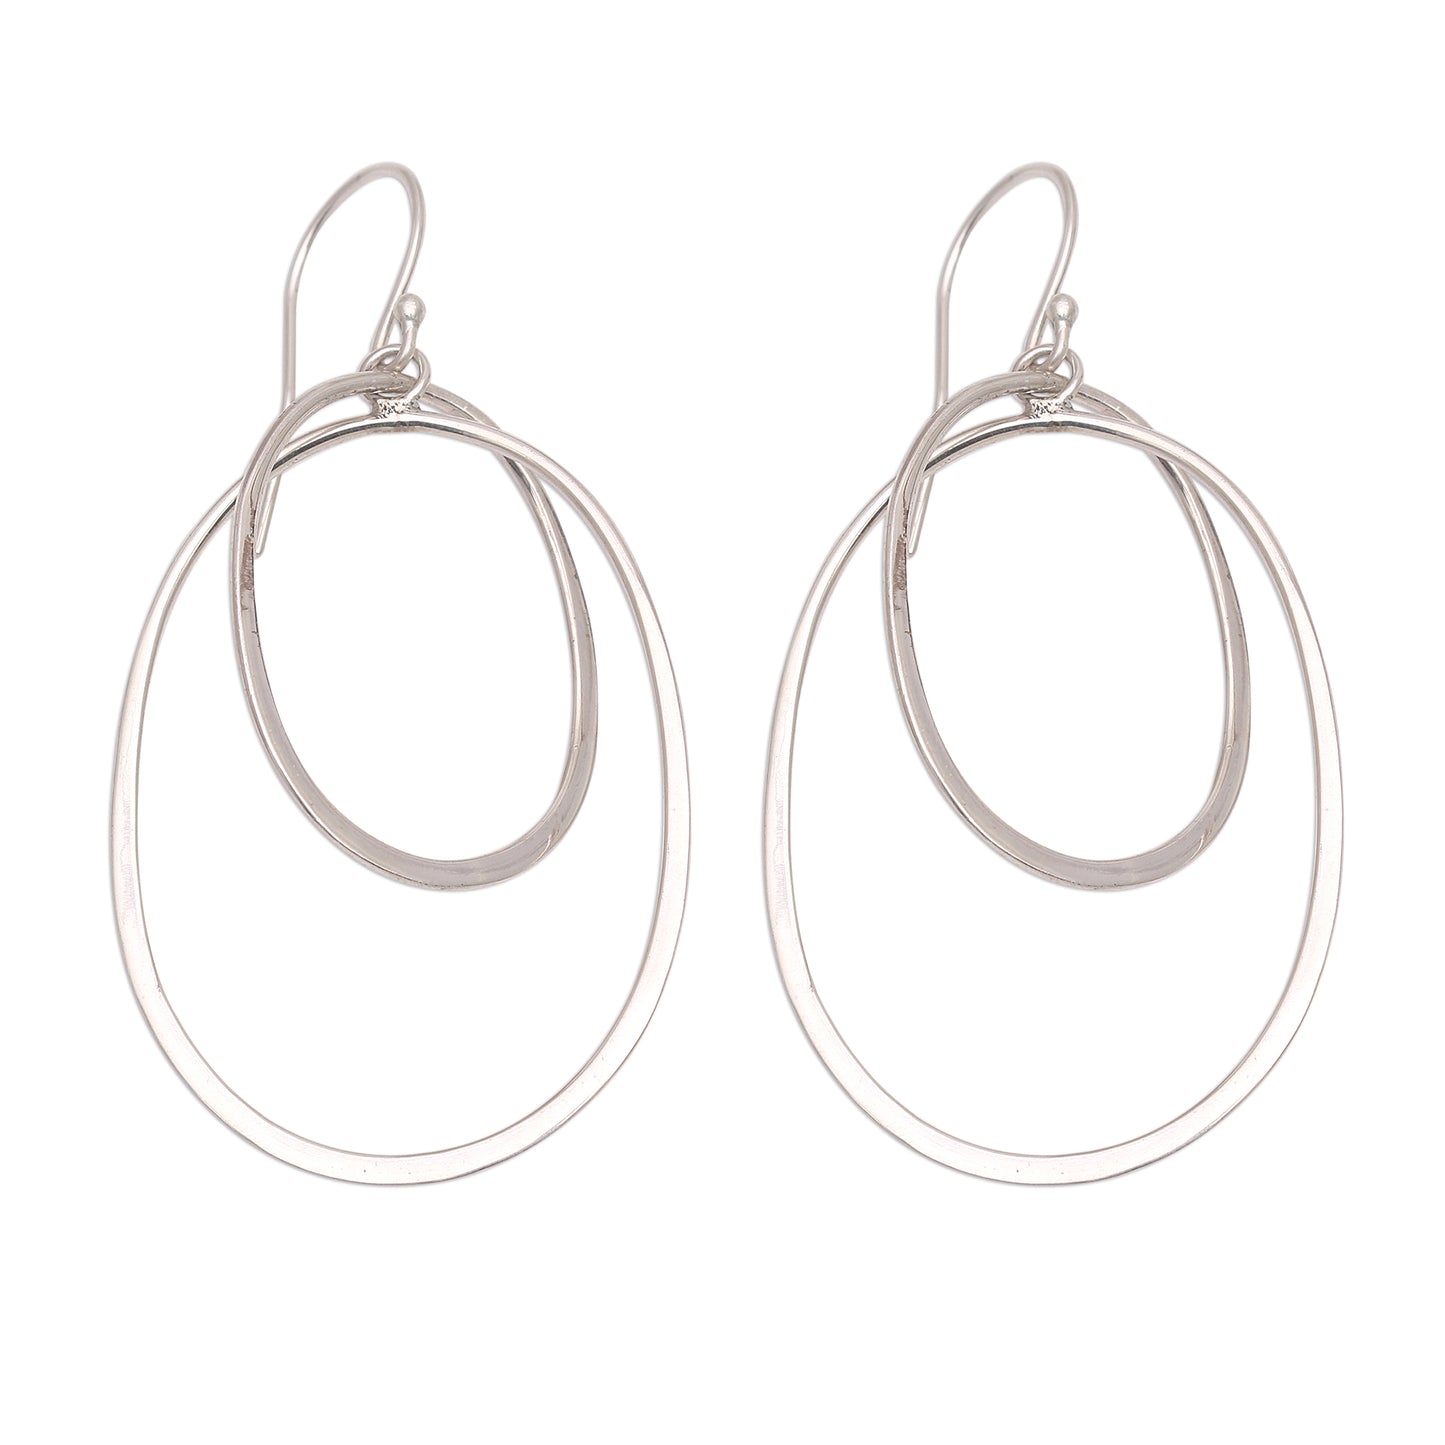 Around You Sterling Silver Dangle Earrings Handcrafted in Bali